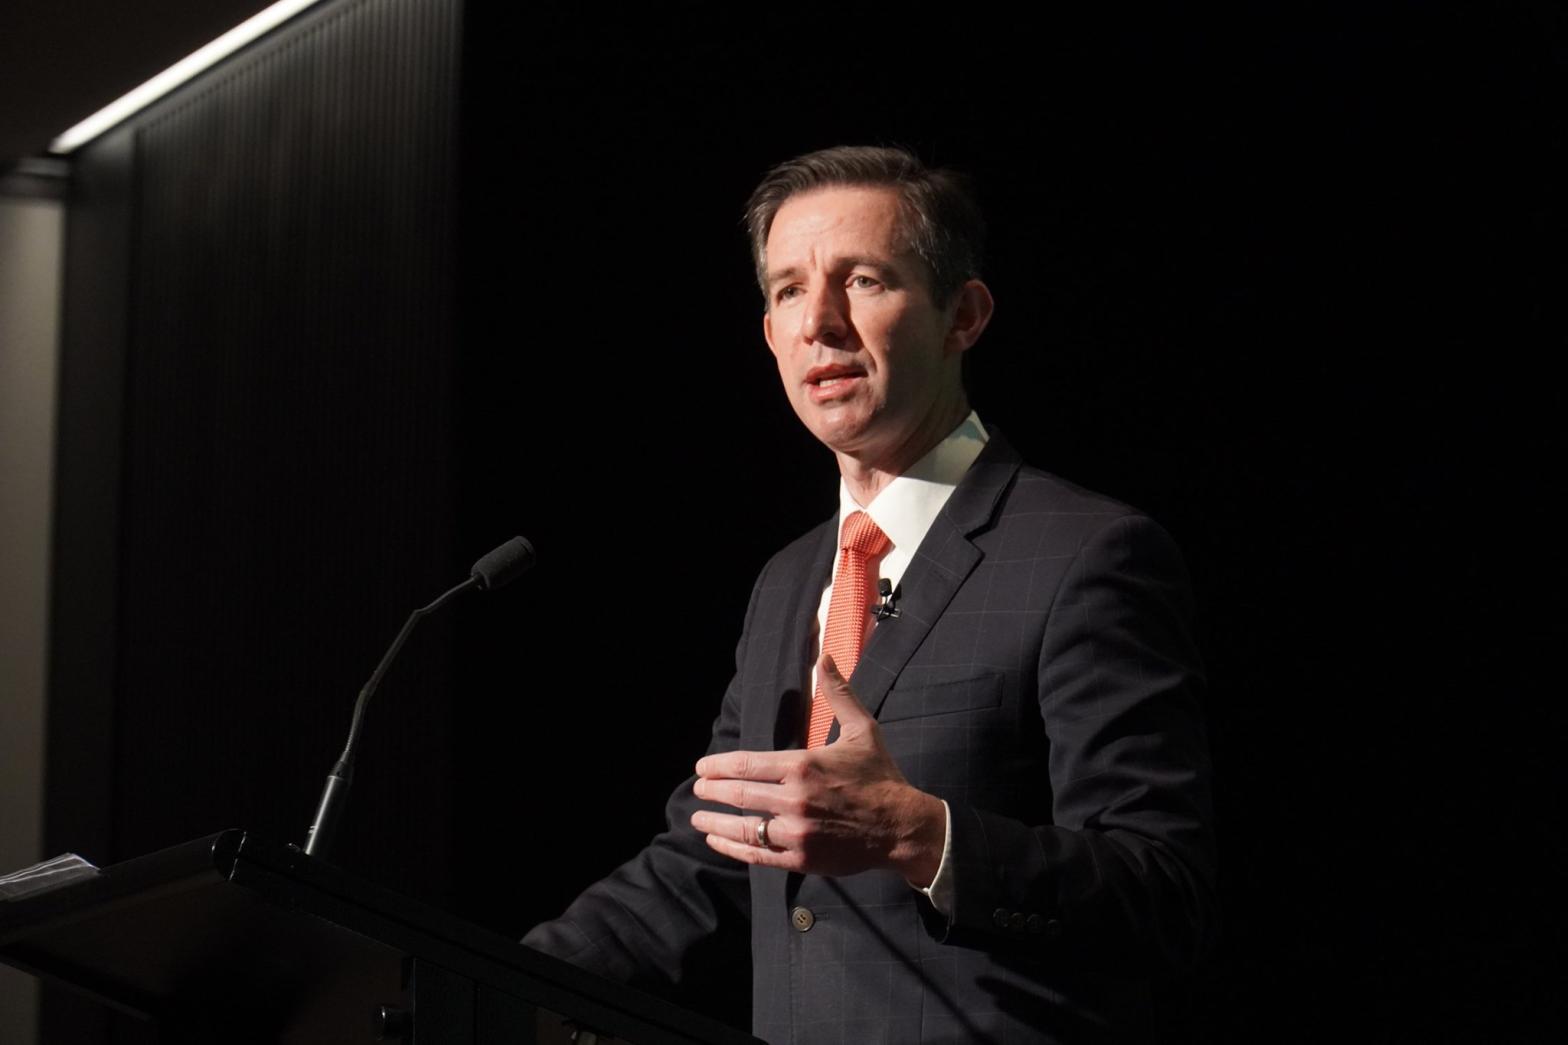 Senior Government minister and Australian politician Simon Birmingham is being impersonated on Telegram